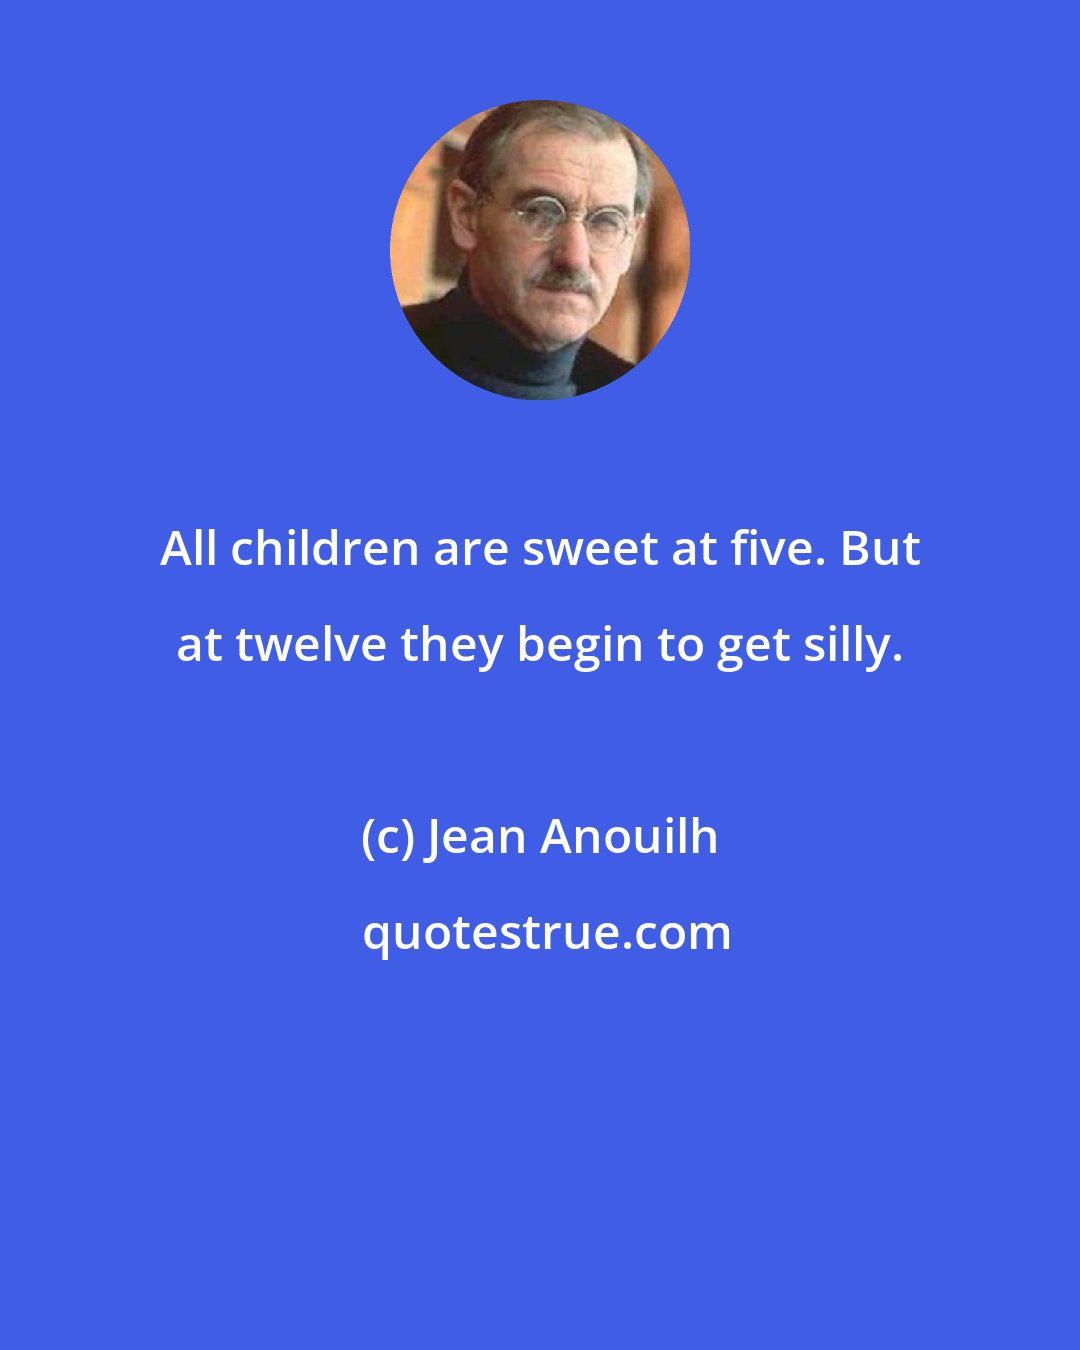 Jean Anouilh: All children are sweet at five. But at twelve they begin to get silly.